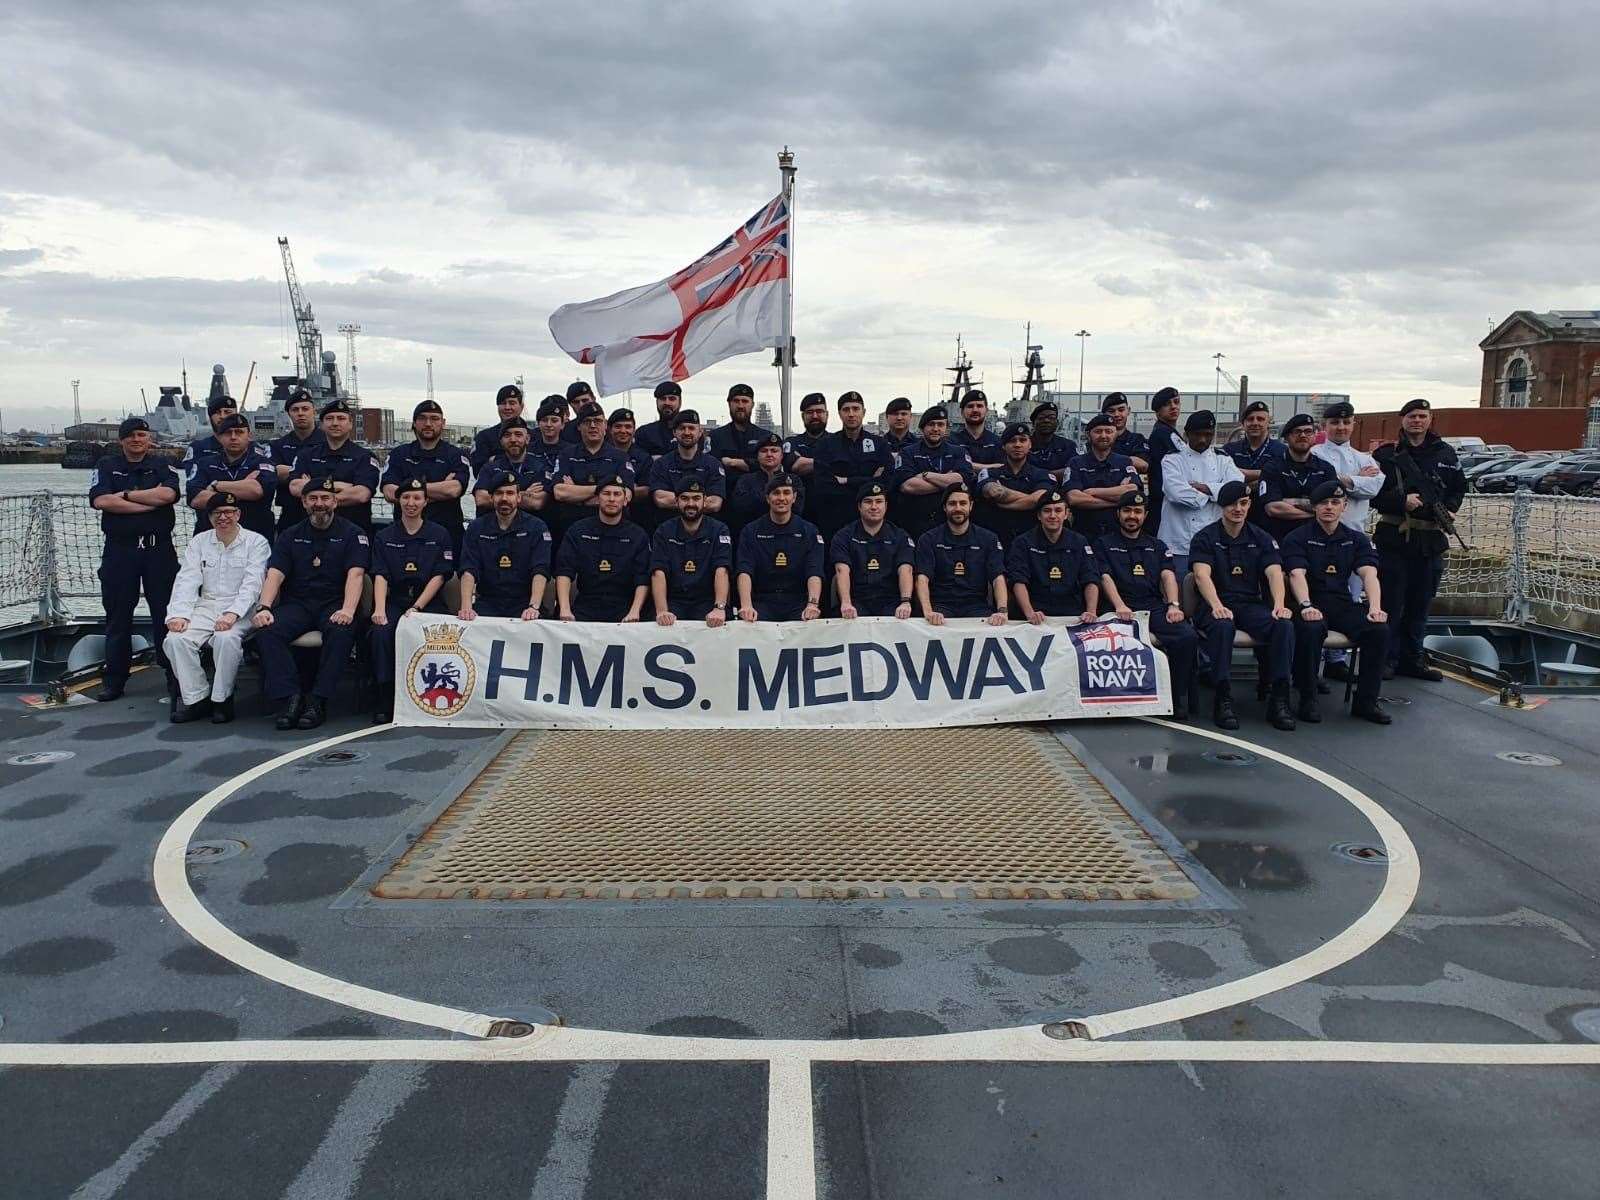 The crew of HMS Medway pose poised for their first mission. Picture: HMS Medway/Twittter